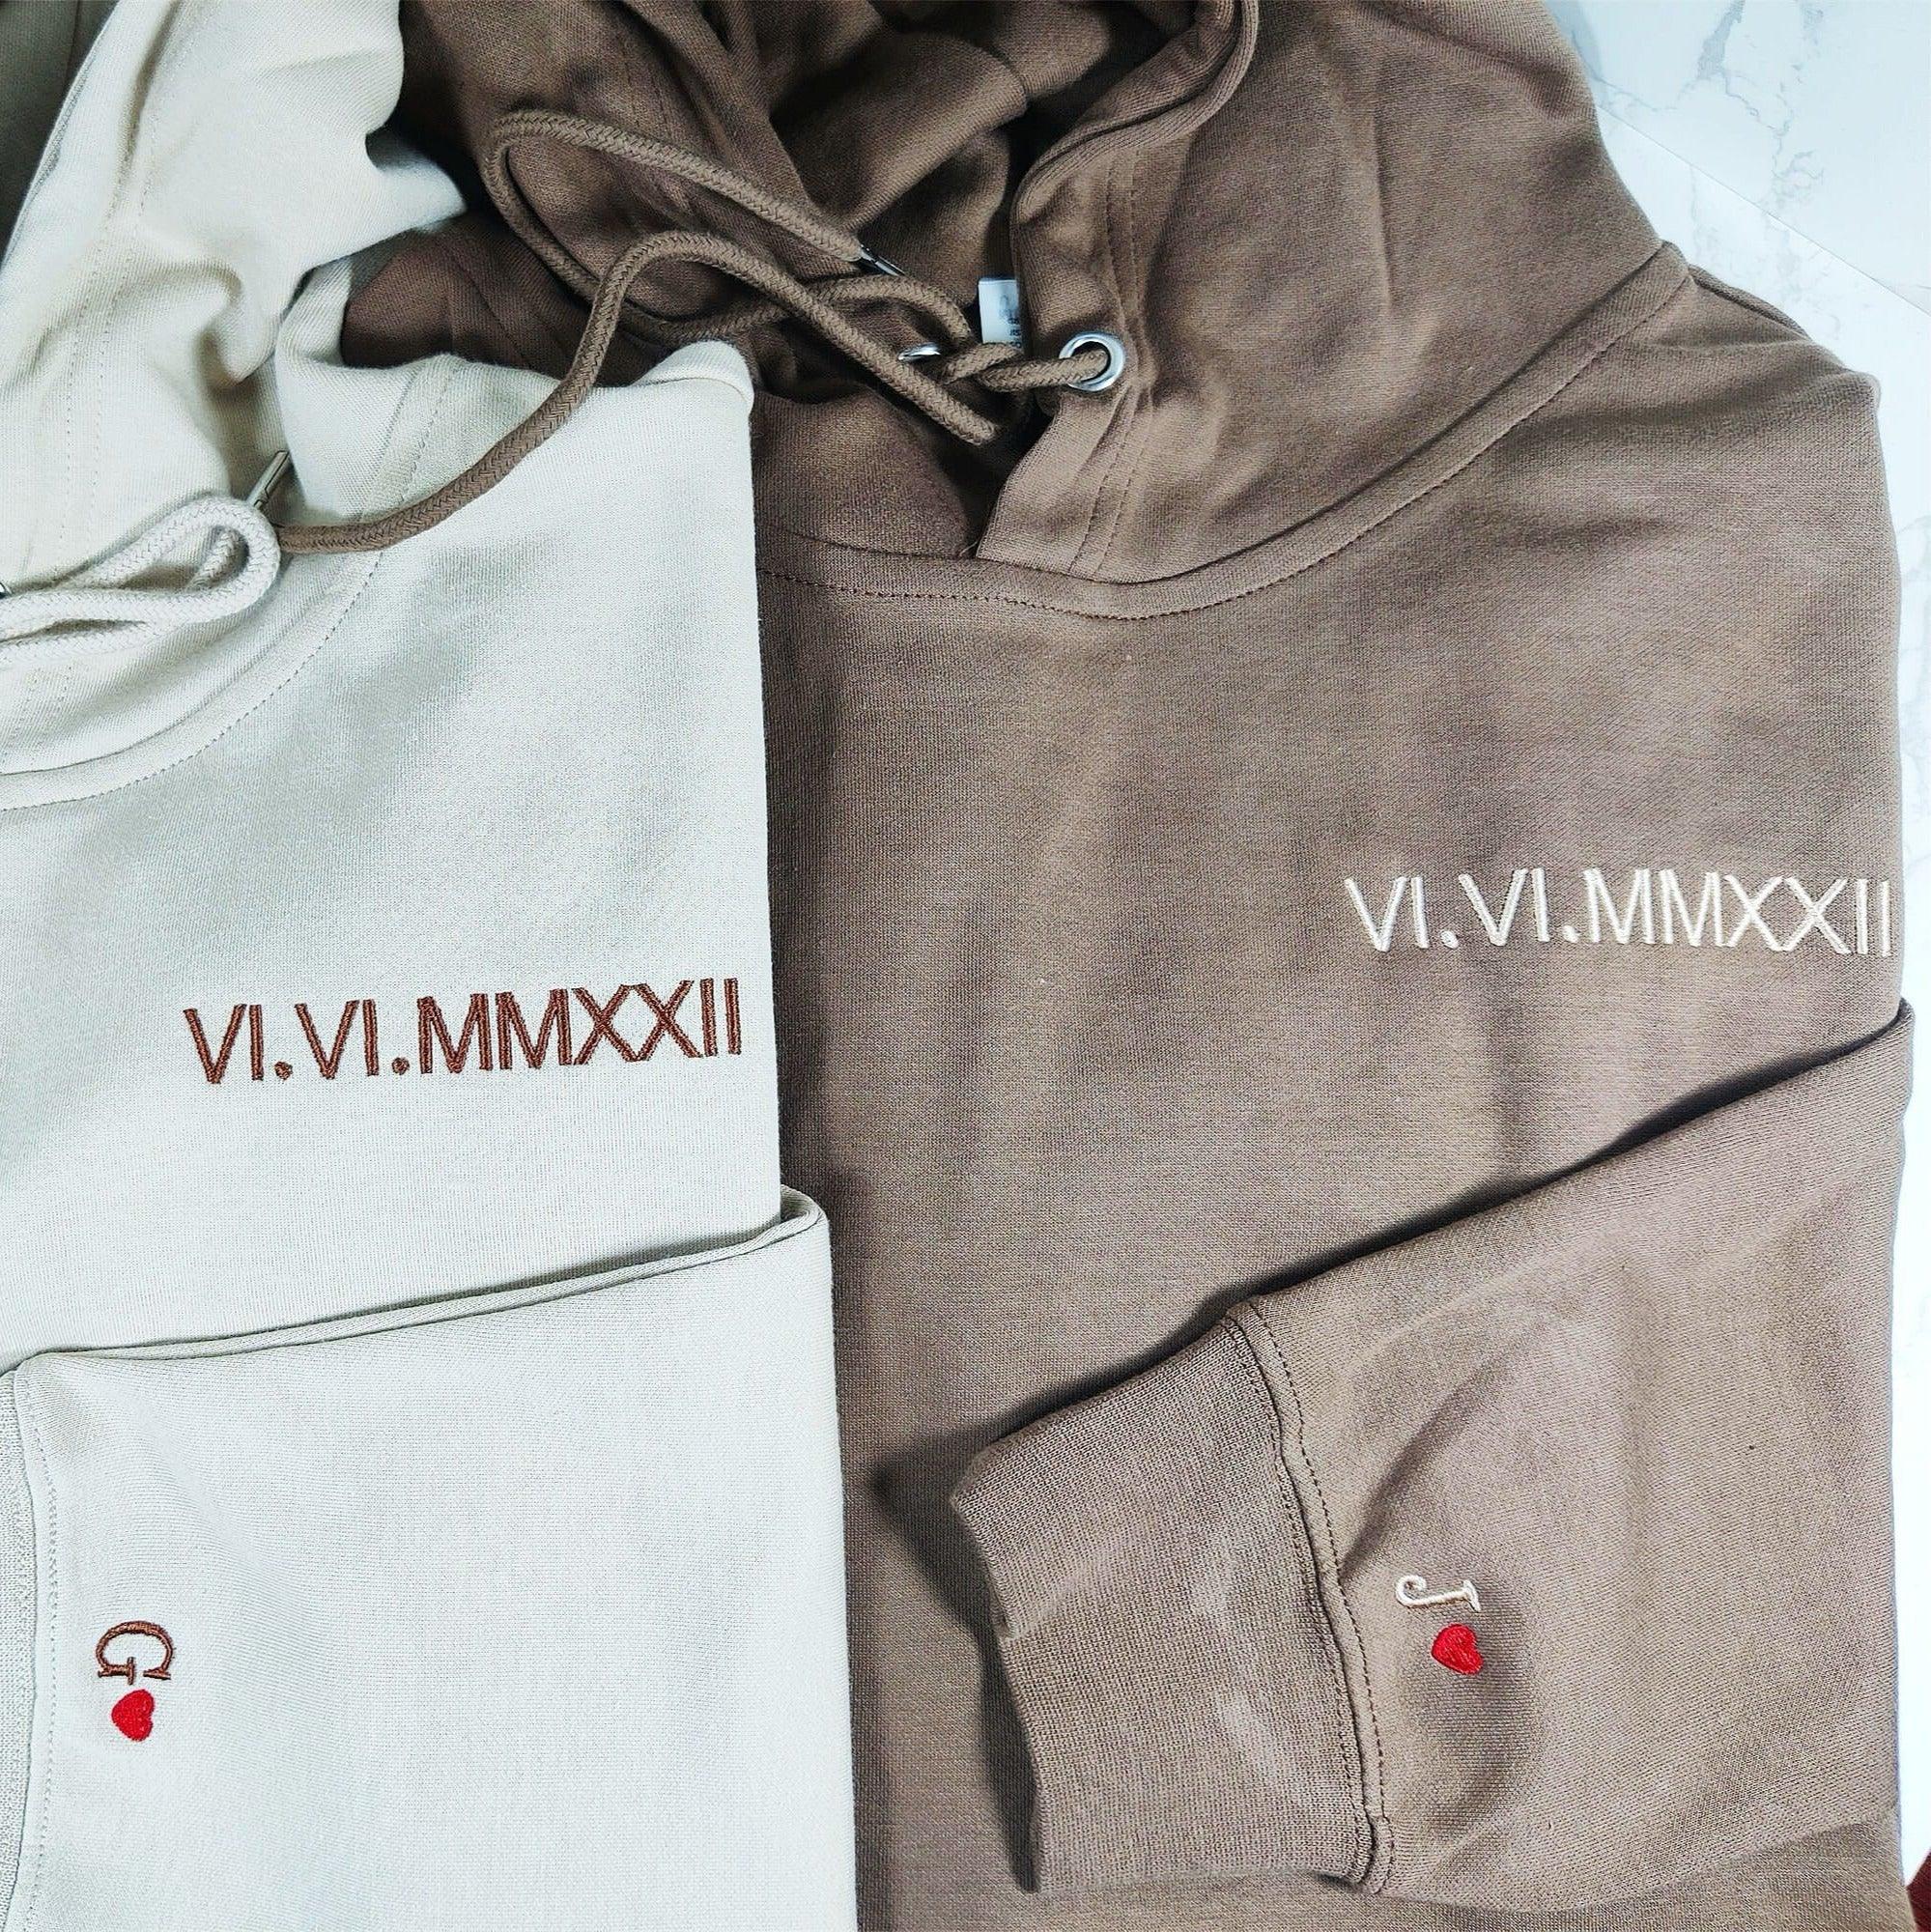 Personalized Embroidered Matching Hoodies with Roman Numerals Date Text and Initials on Sleeve